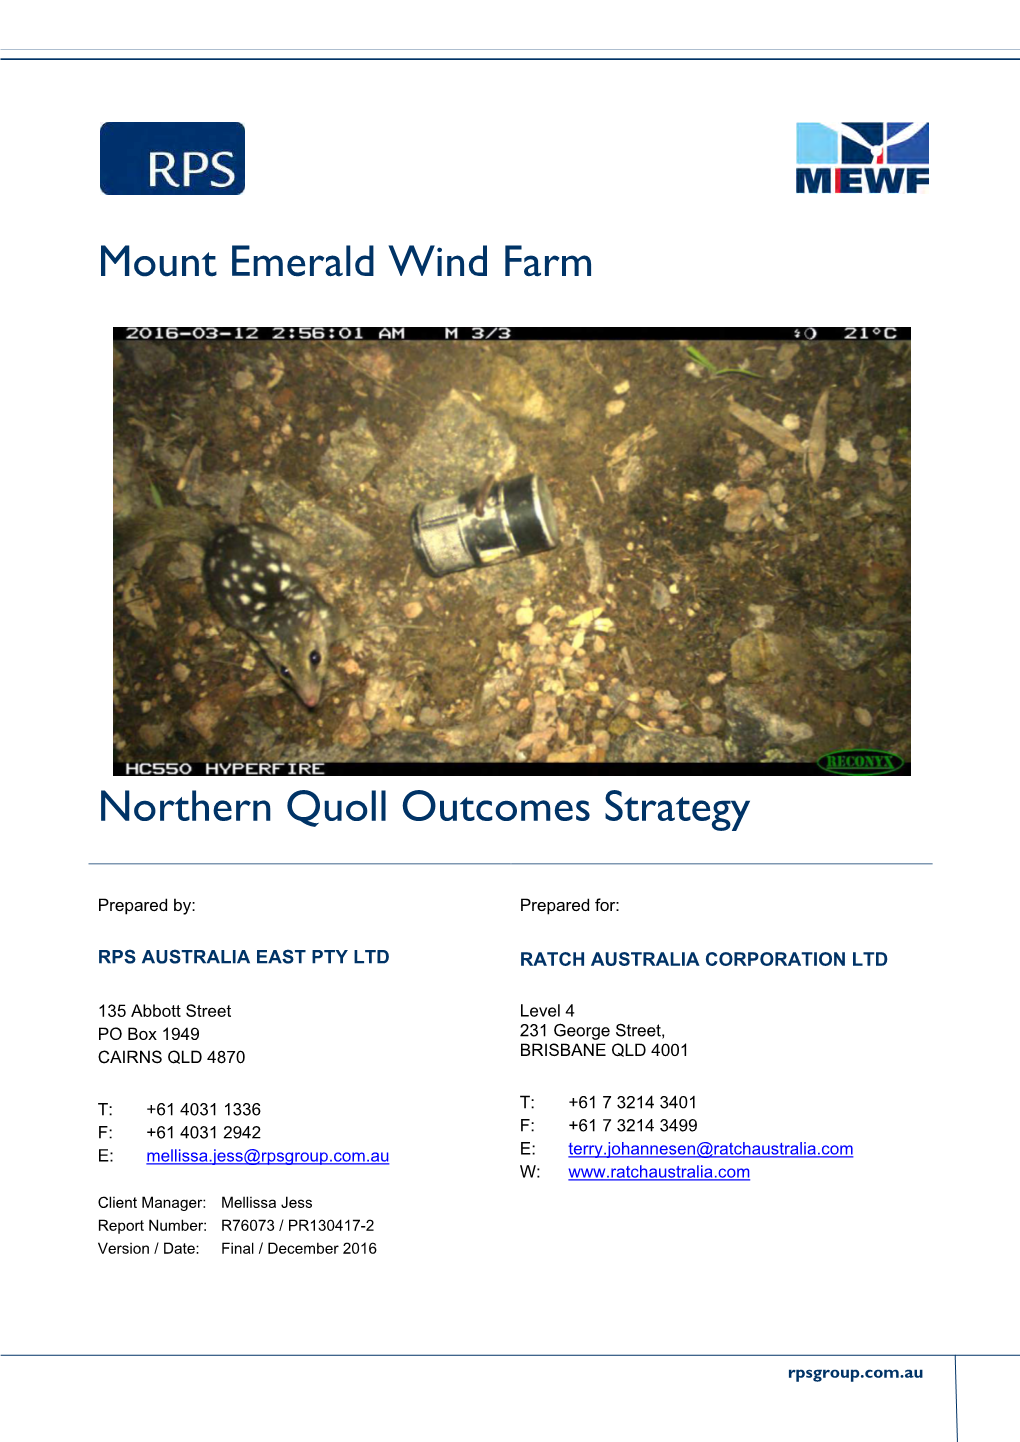 Northern Quoll Outcomes Strategy